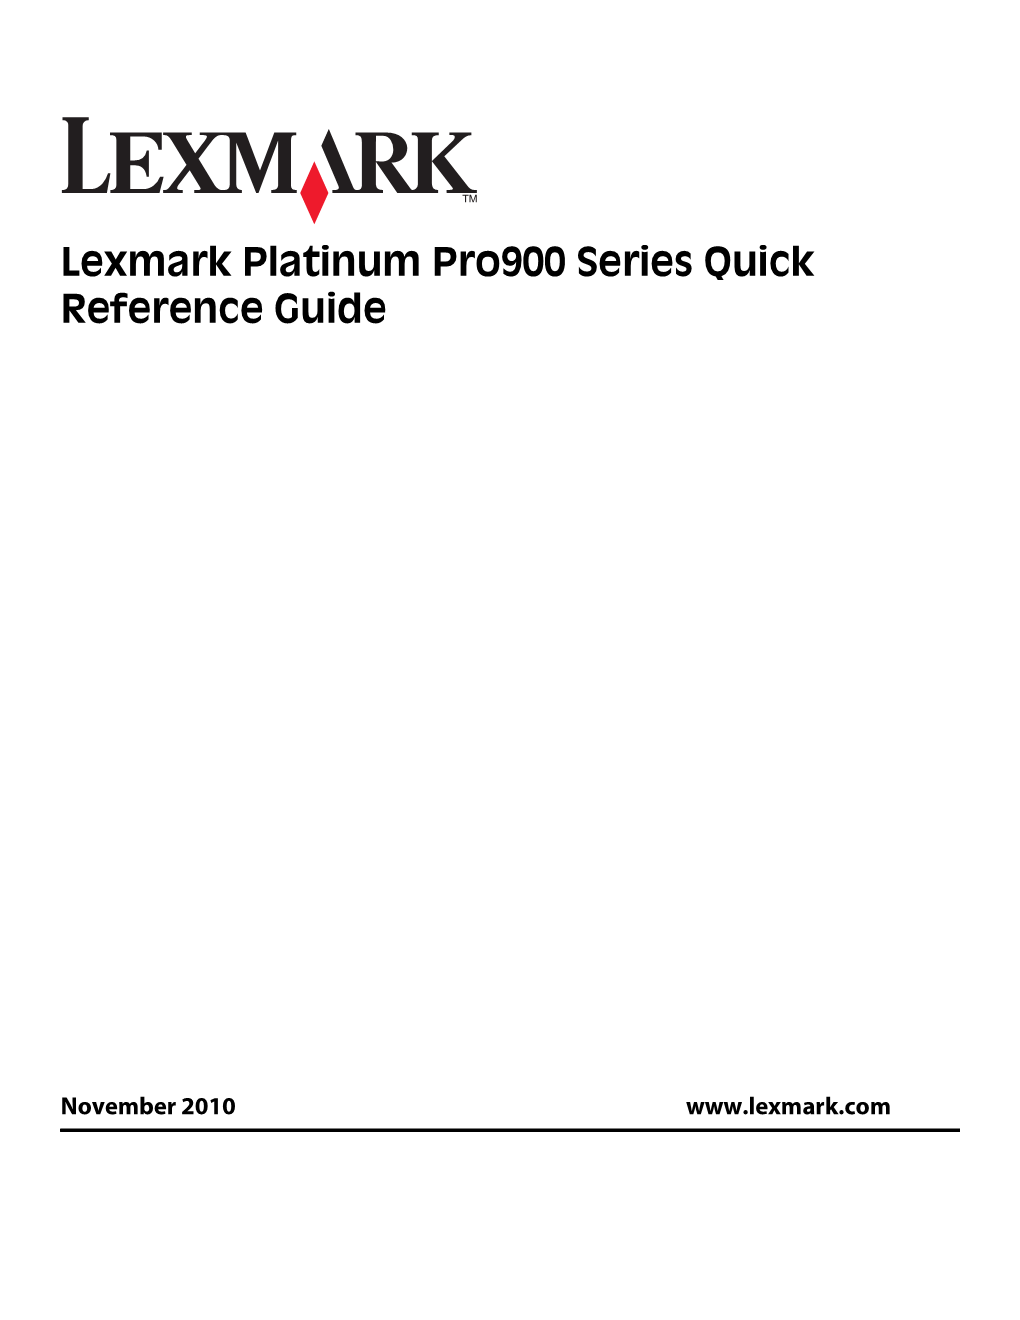 Lexmark Platinum Pro900 Series Quick Reference Guide